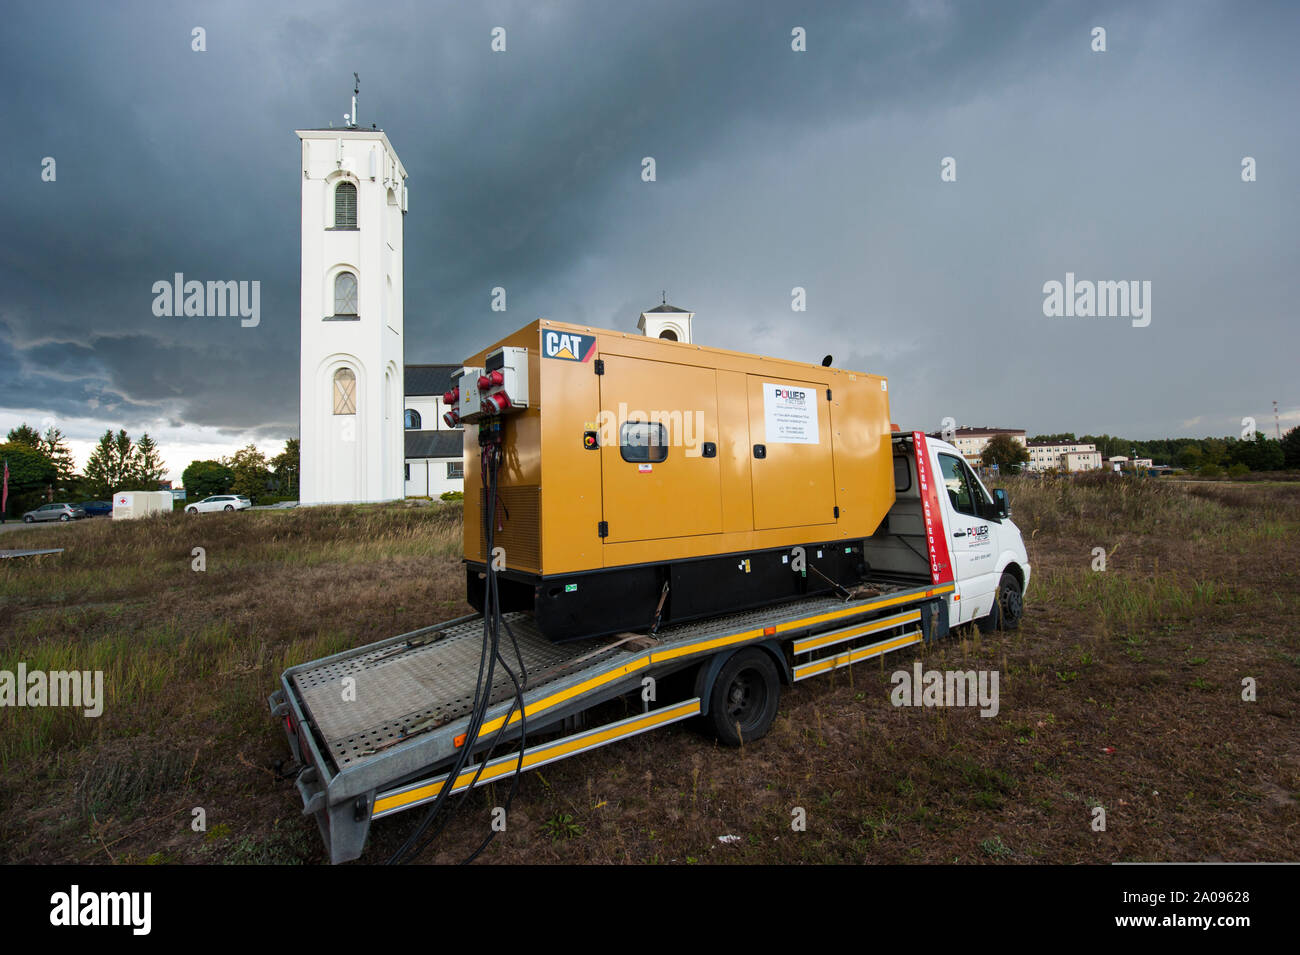 Emergency electric power generator used during stormy weather in Pultusk, Poland, to provide electricity for a community with church and a hospital. Stock Photo